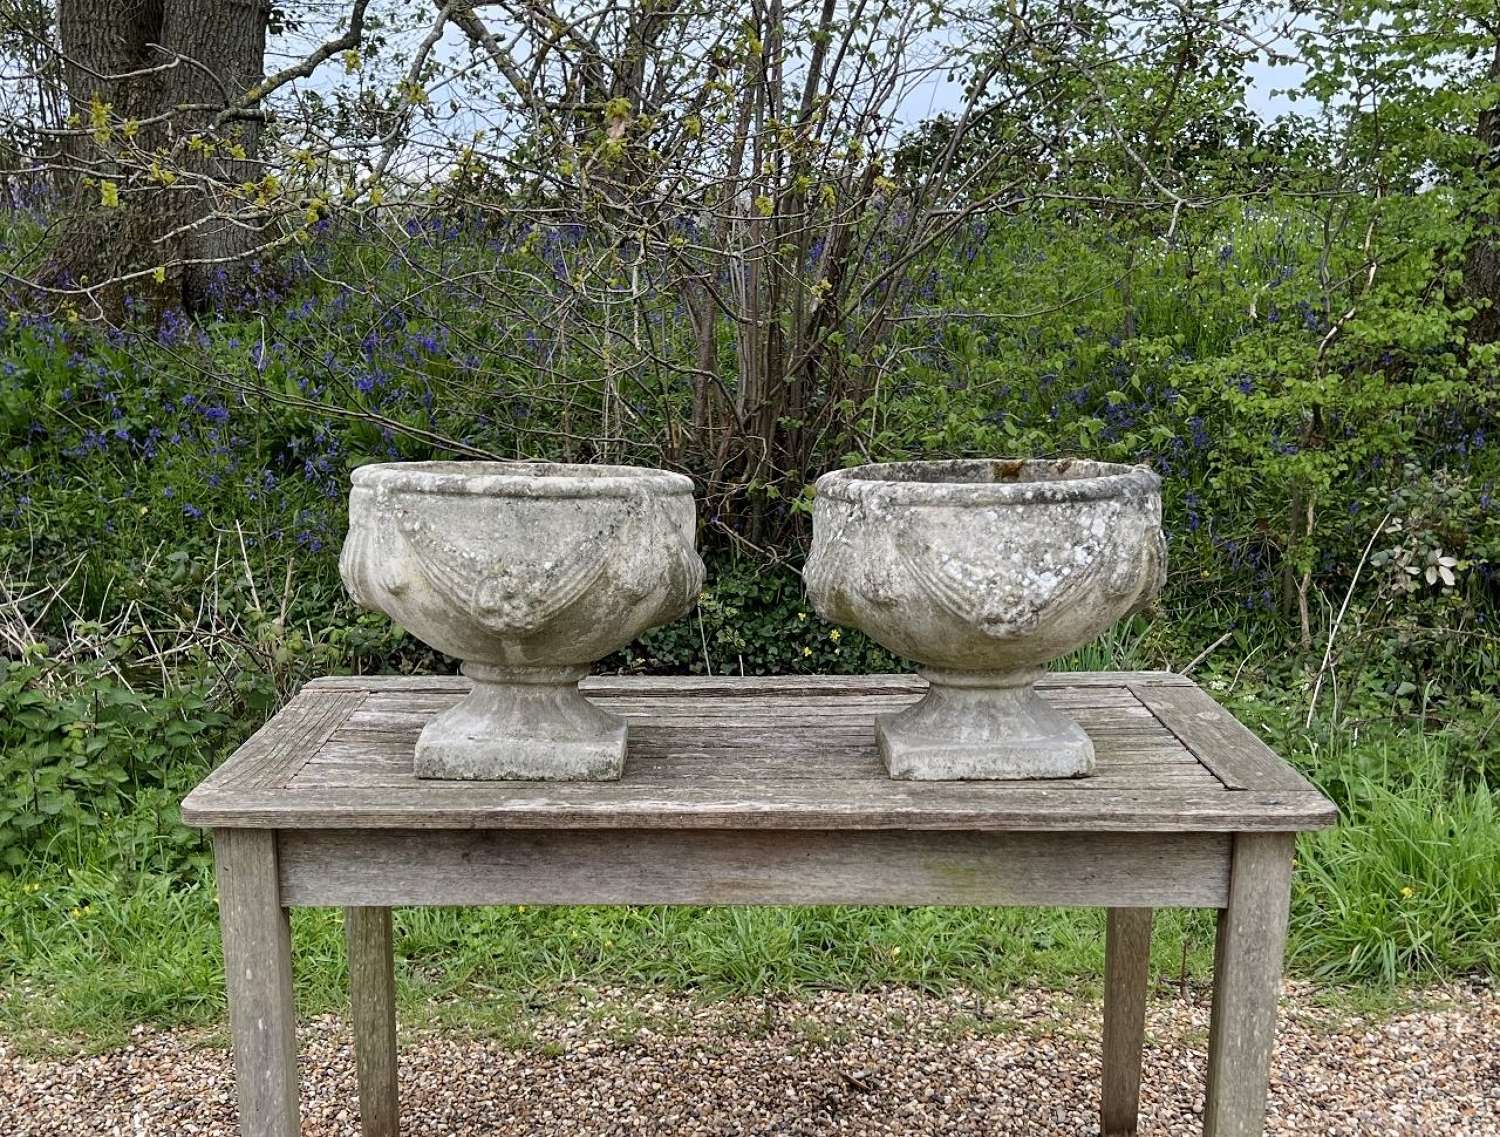 Pair of Patinated Goblet Urns